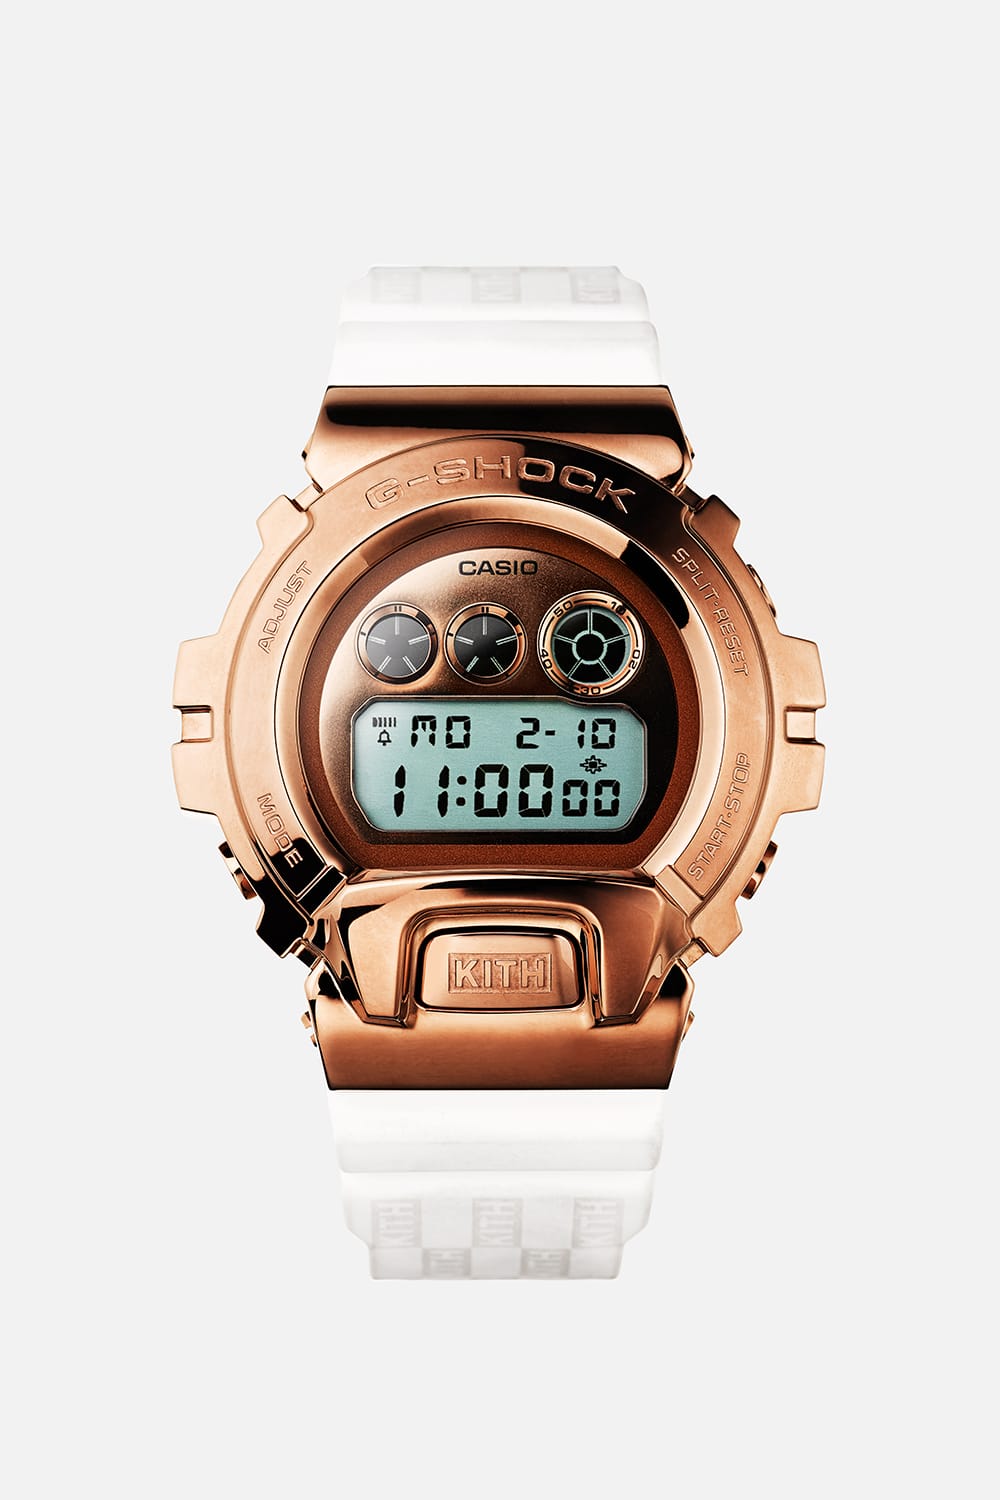 KITH and G-SHOCK Upgrade the GM-6900 Watch in Rose Gold | Hypebeast